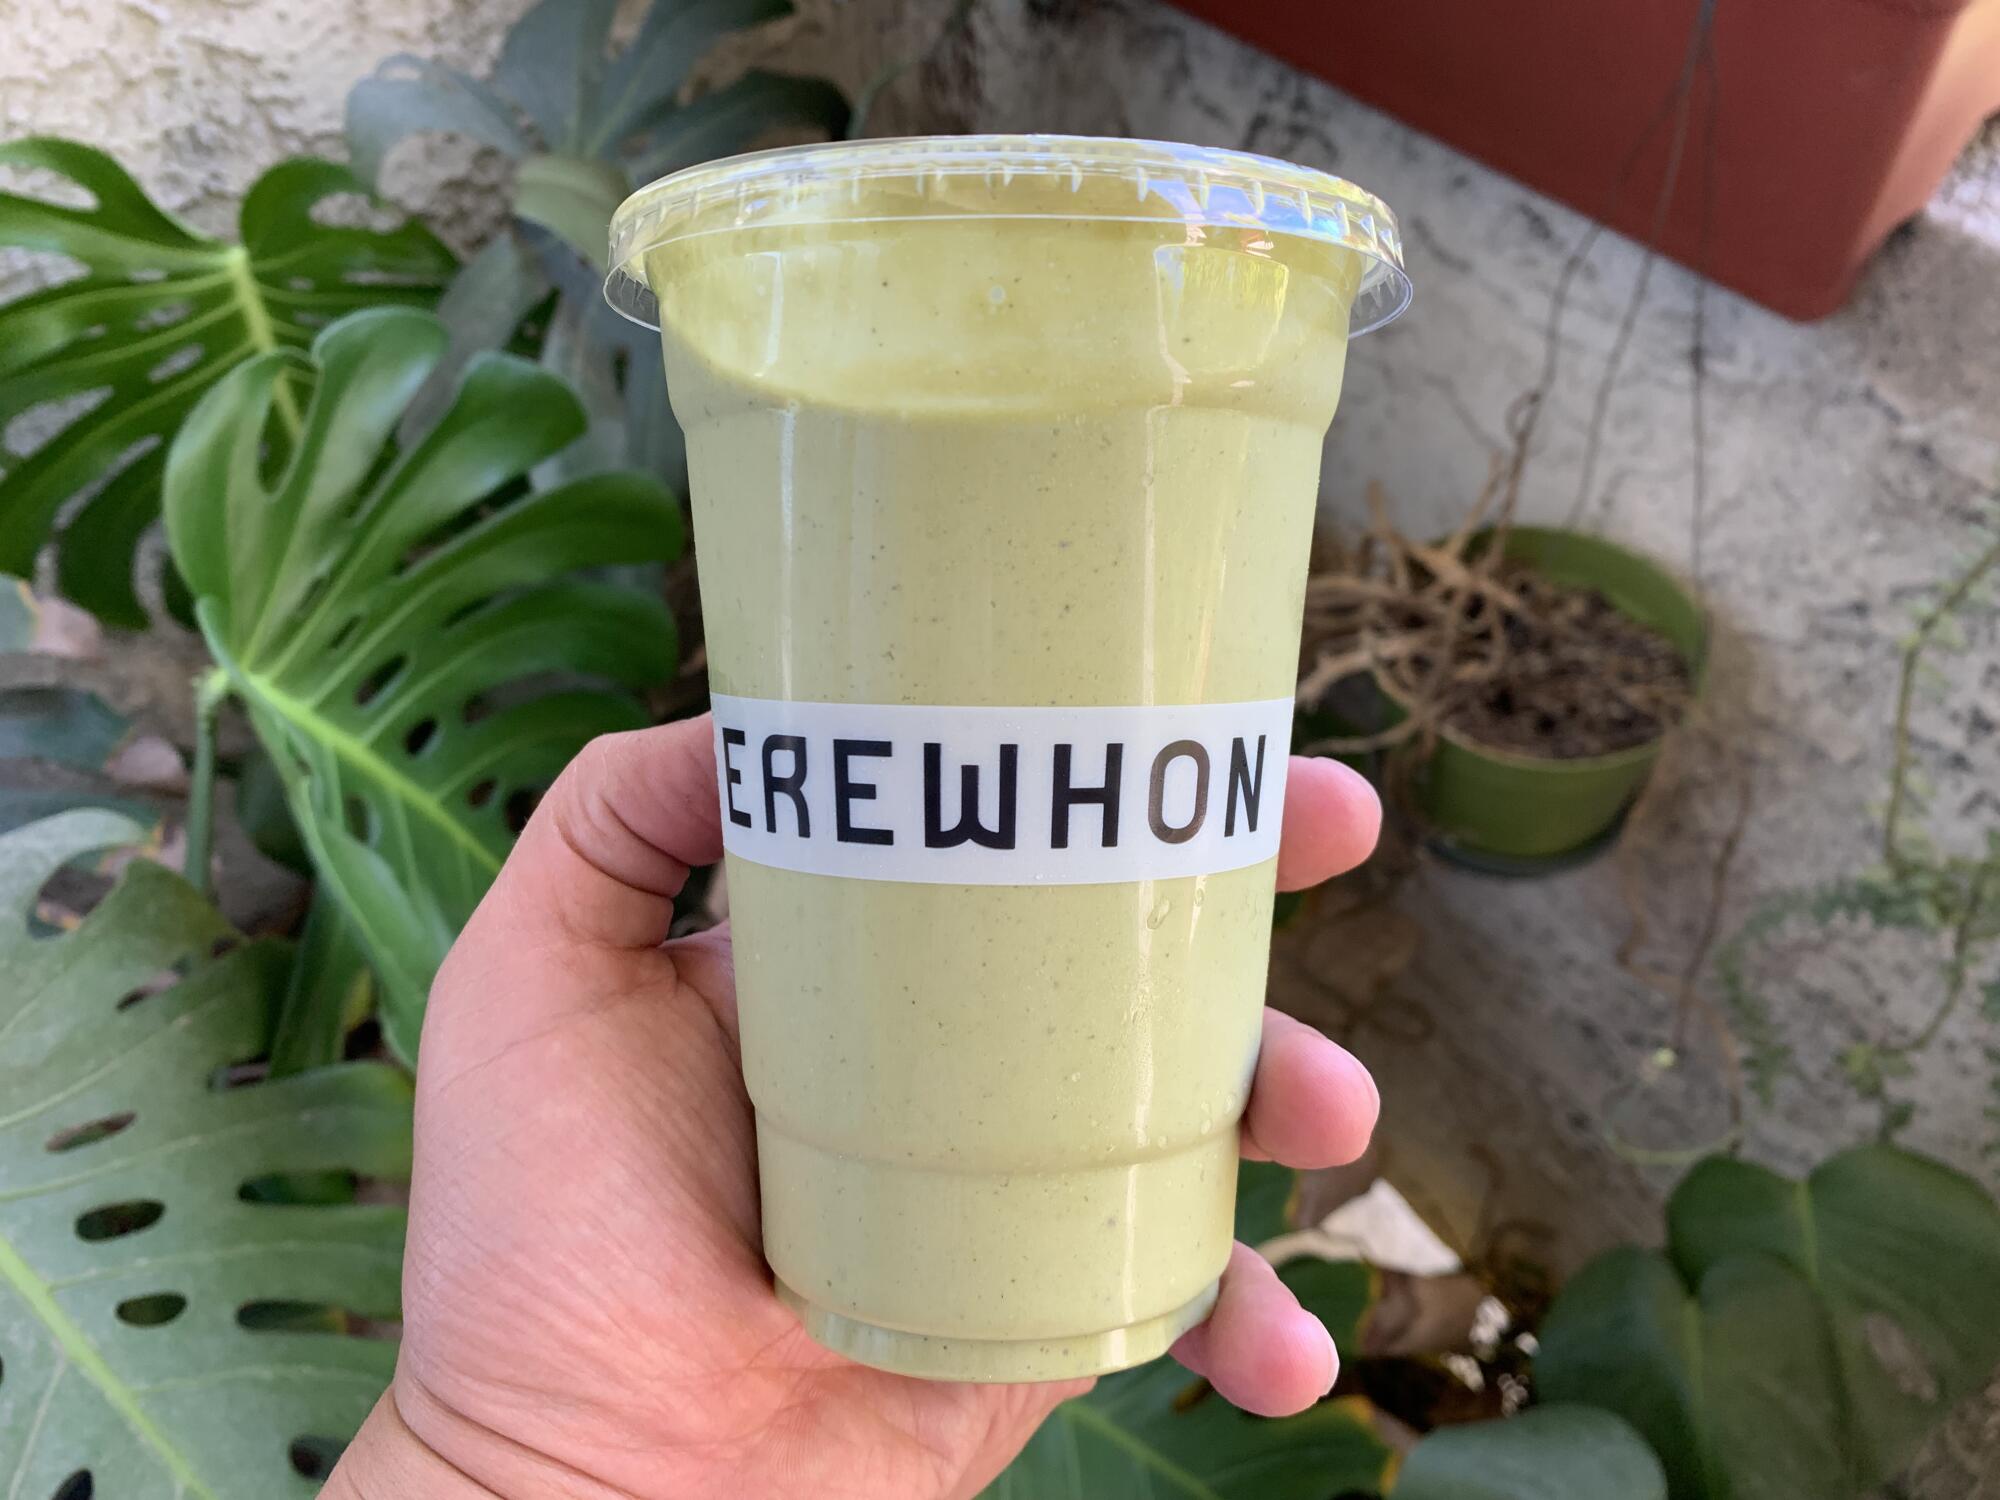 A hand holds a yellowish-green smoothie in a plastic cup that says Erewhon.